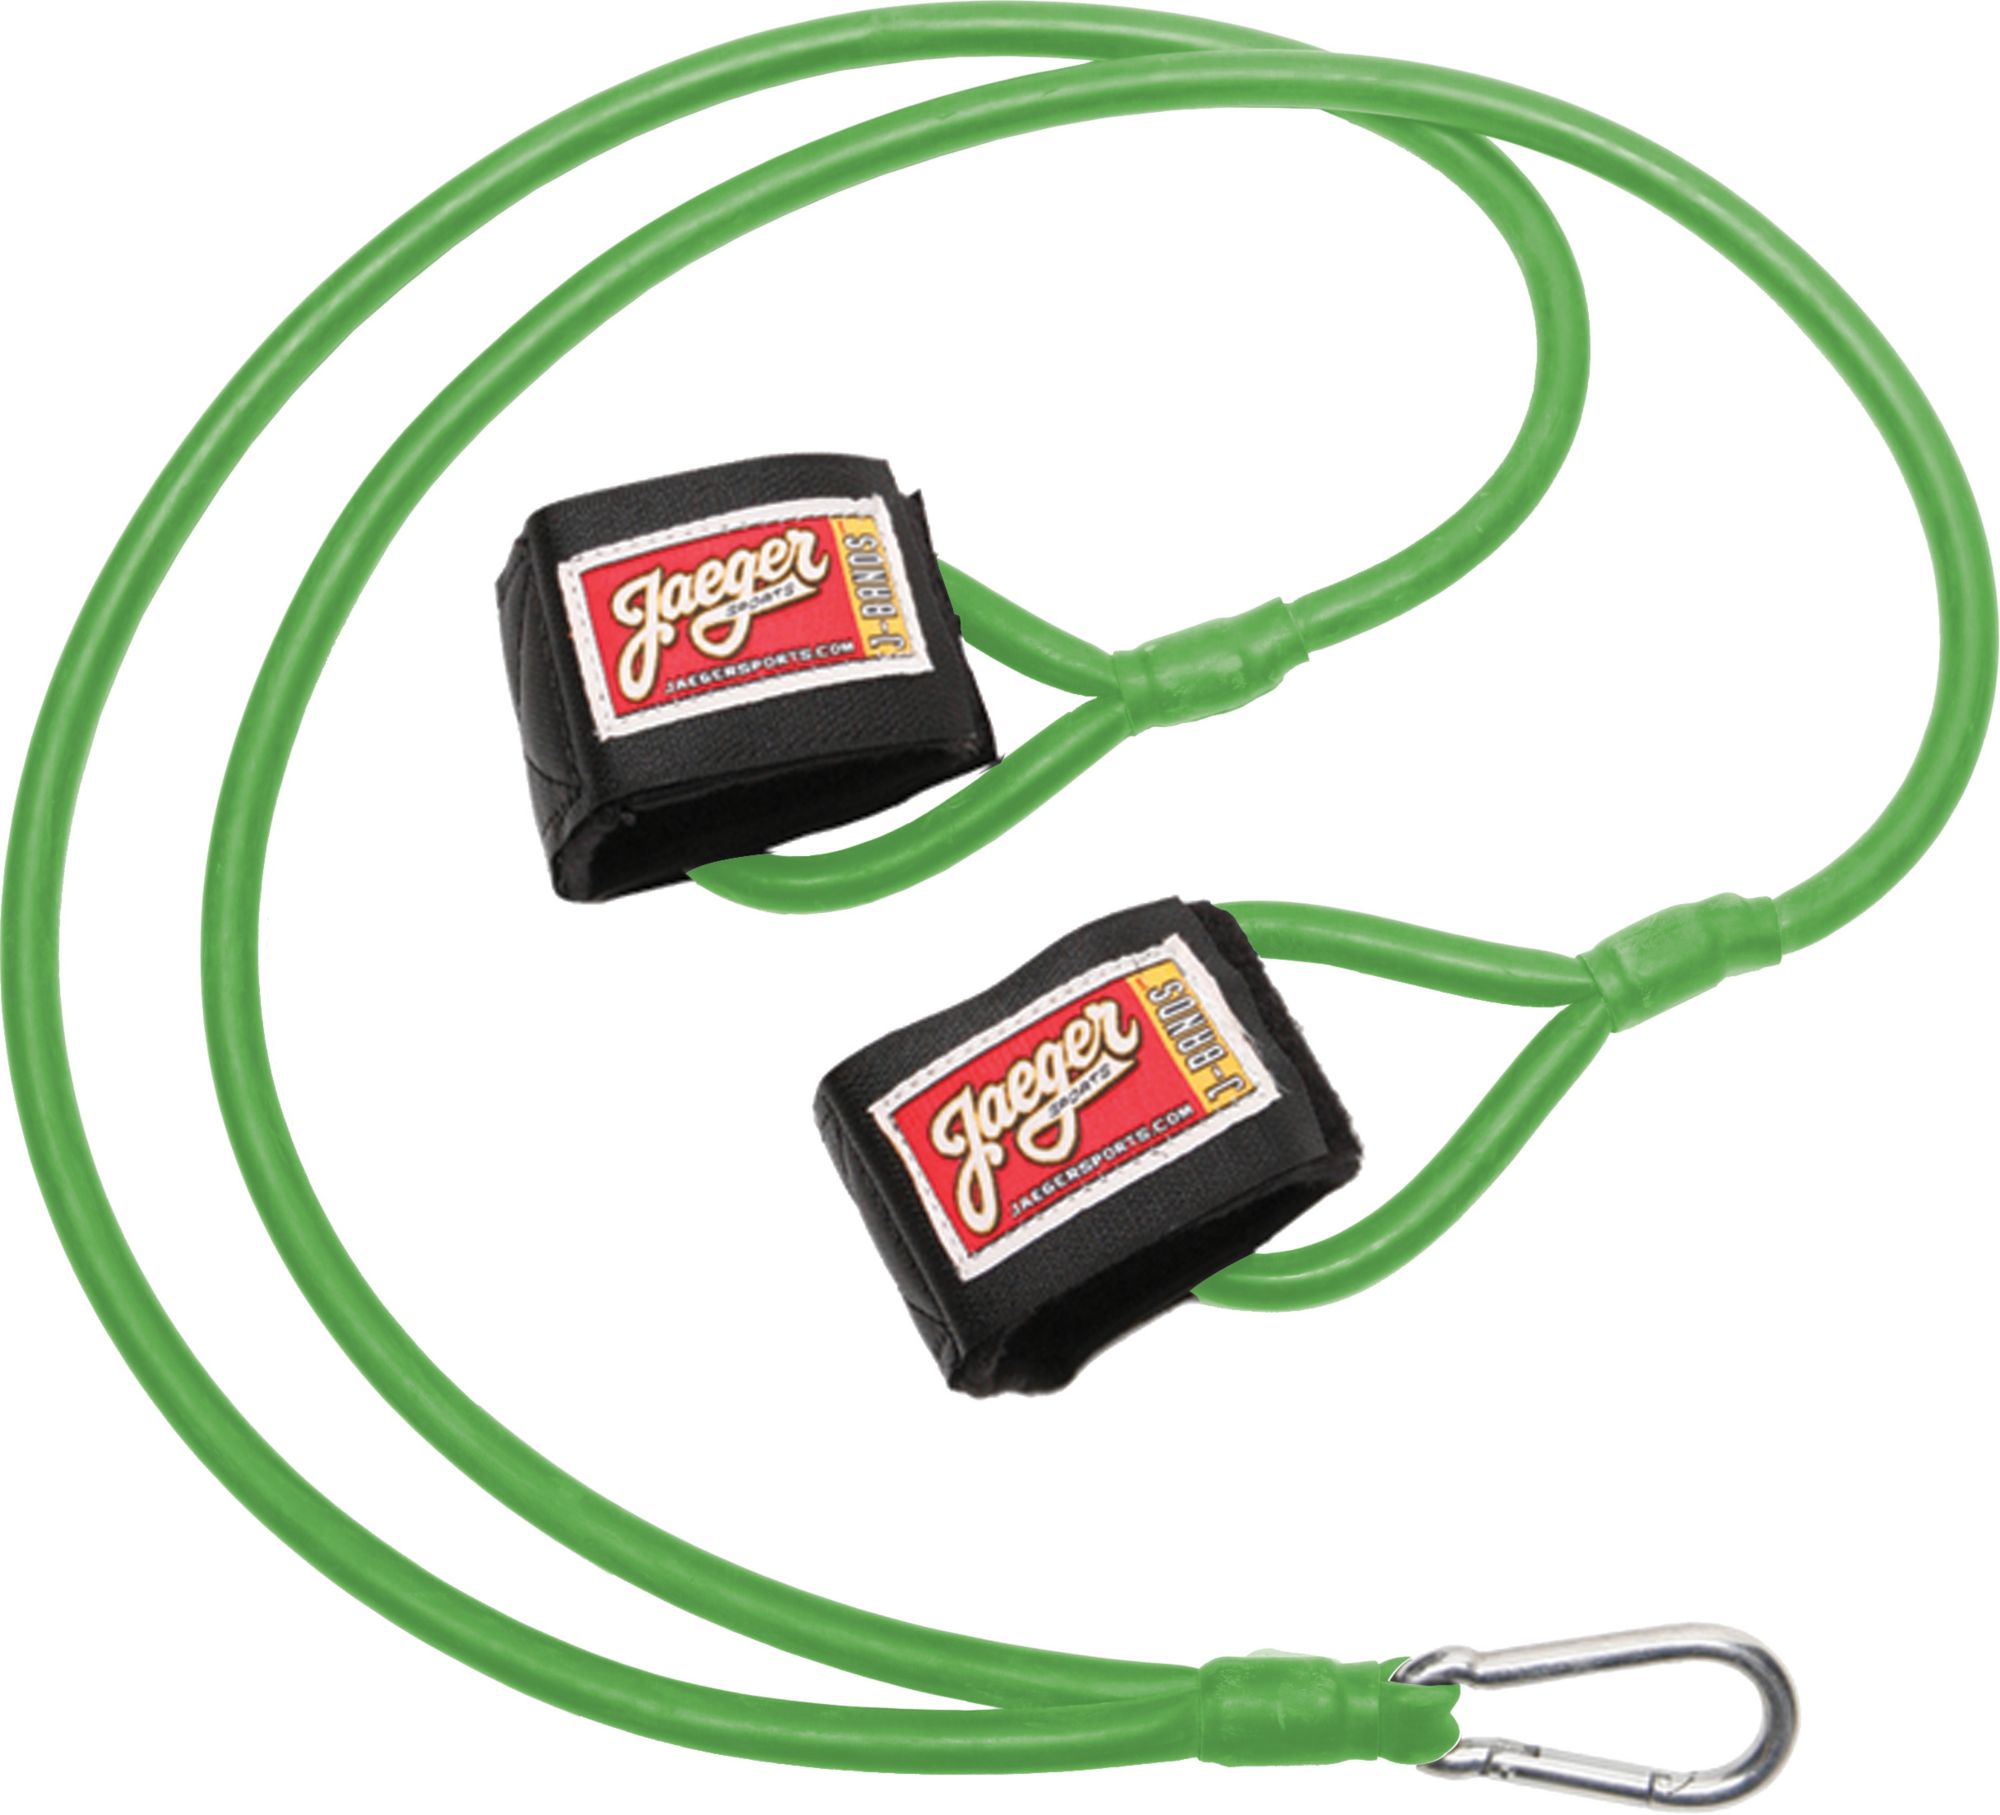 Jaeger Sports Adult J-Bands Exercise Program | Dick's Sporting Goods